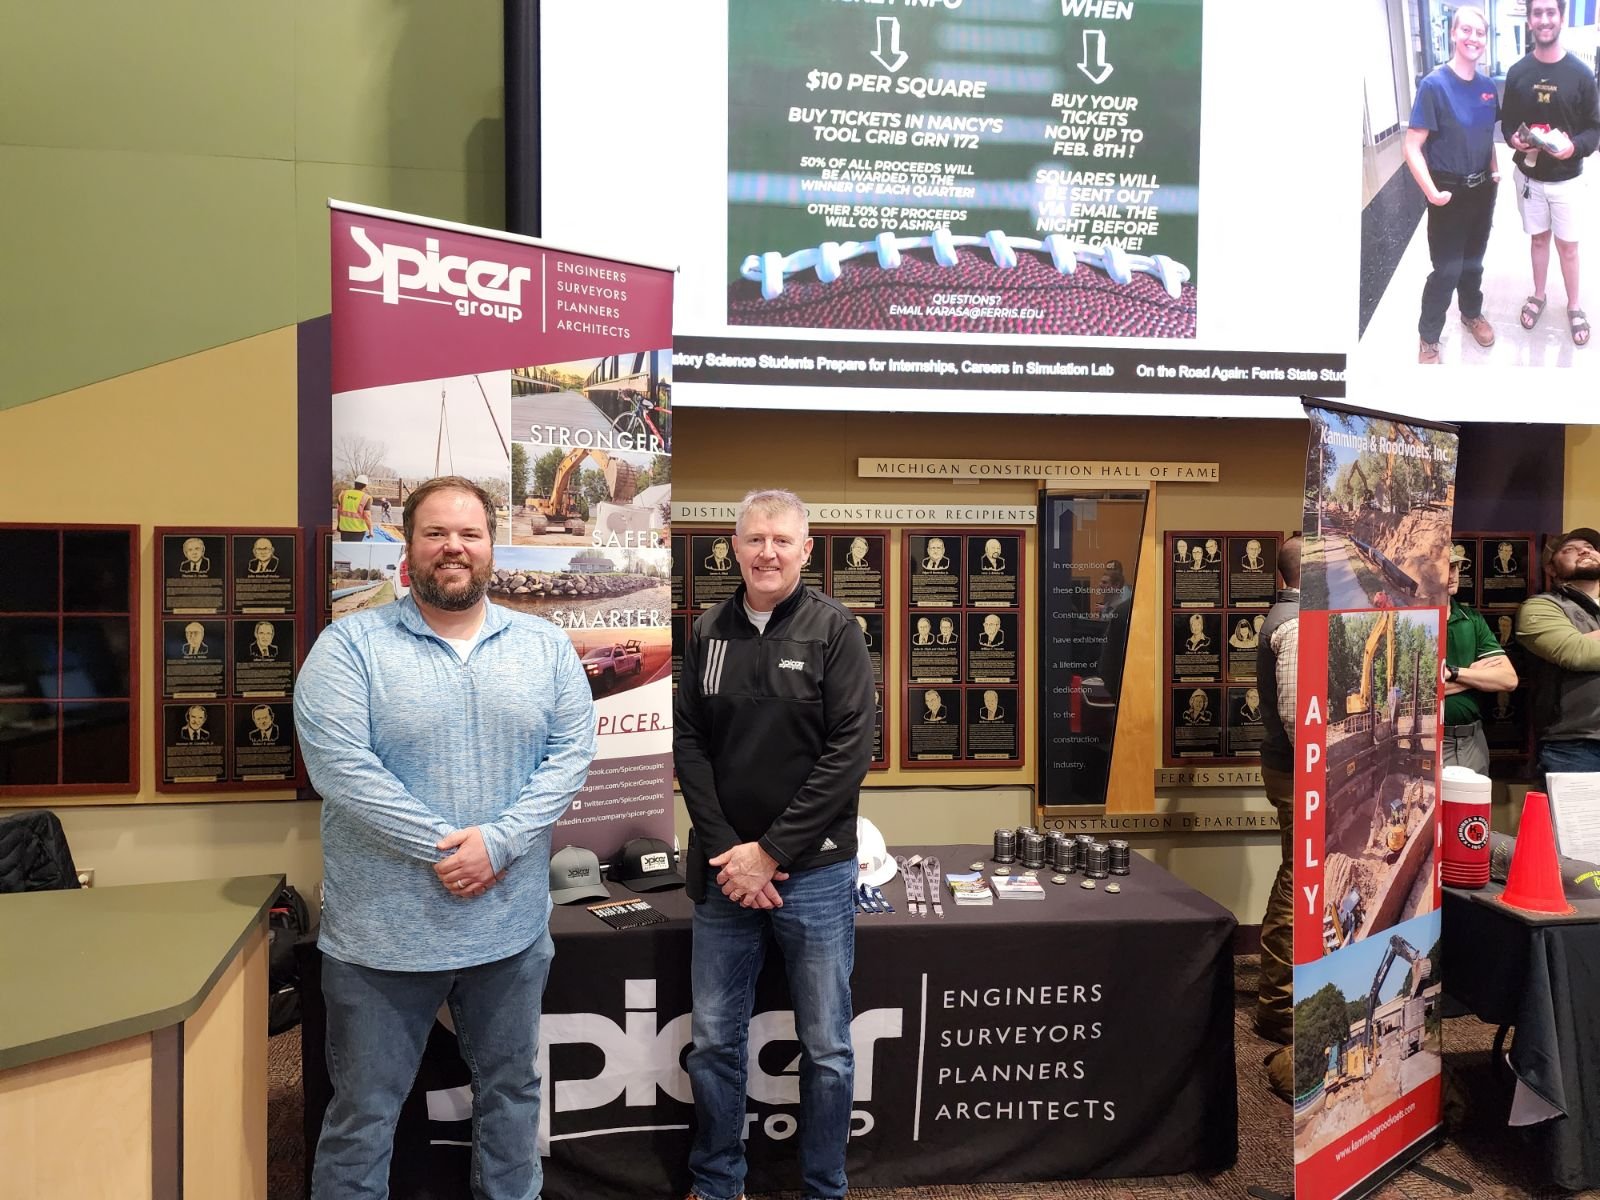  Construction Service Group Manager, Nate Pfennginer, P.E., and Senior Manager, Rick Born, at a job fair. 